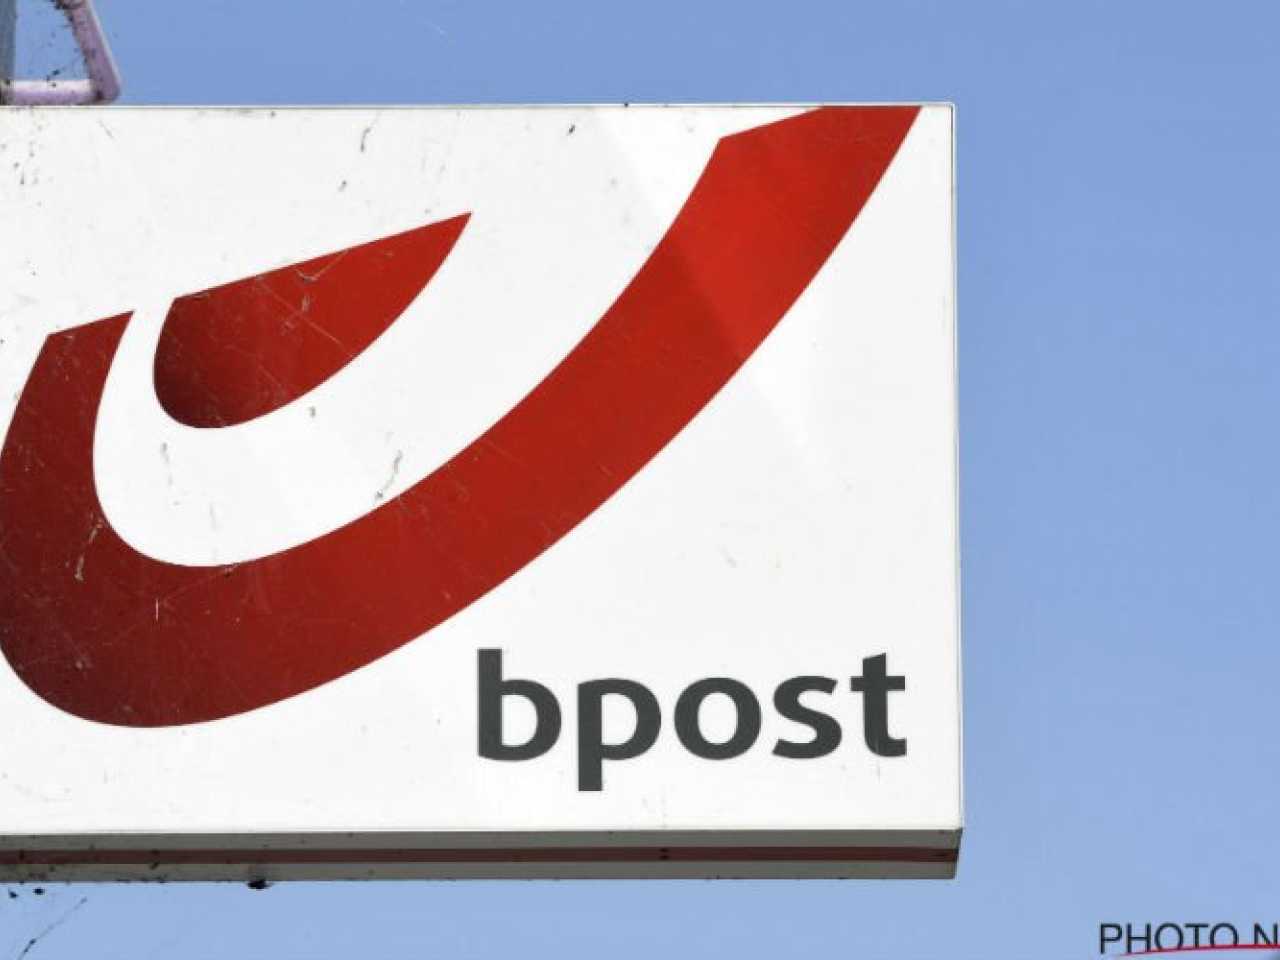 Bpost announces changes that will make our lives much easier